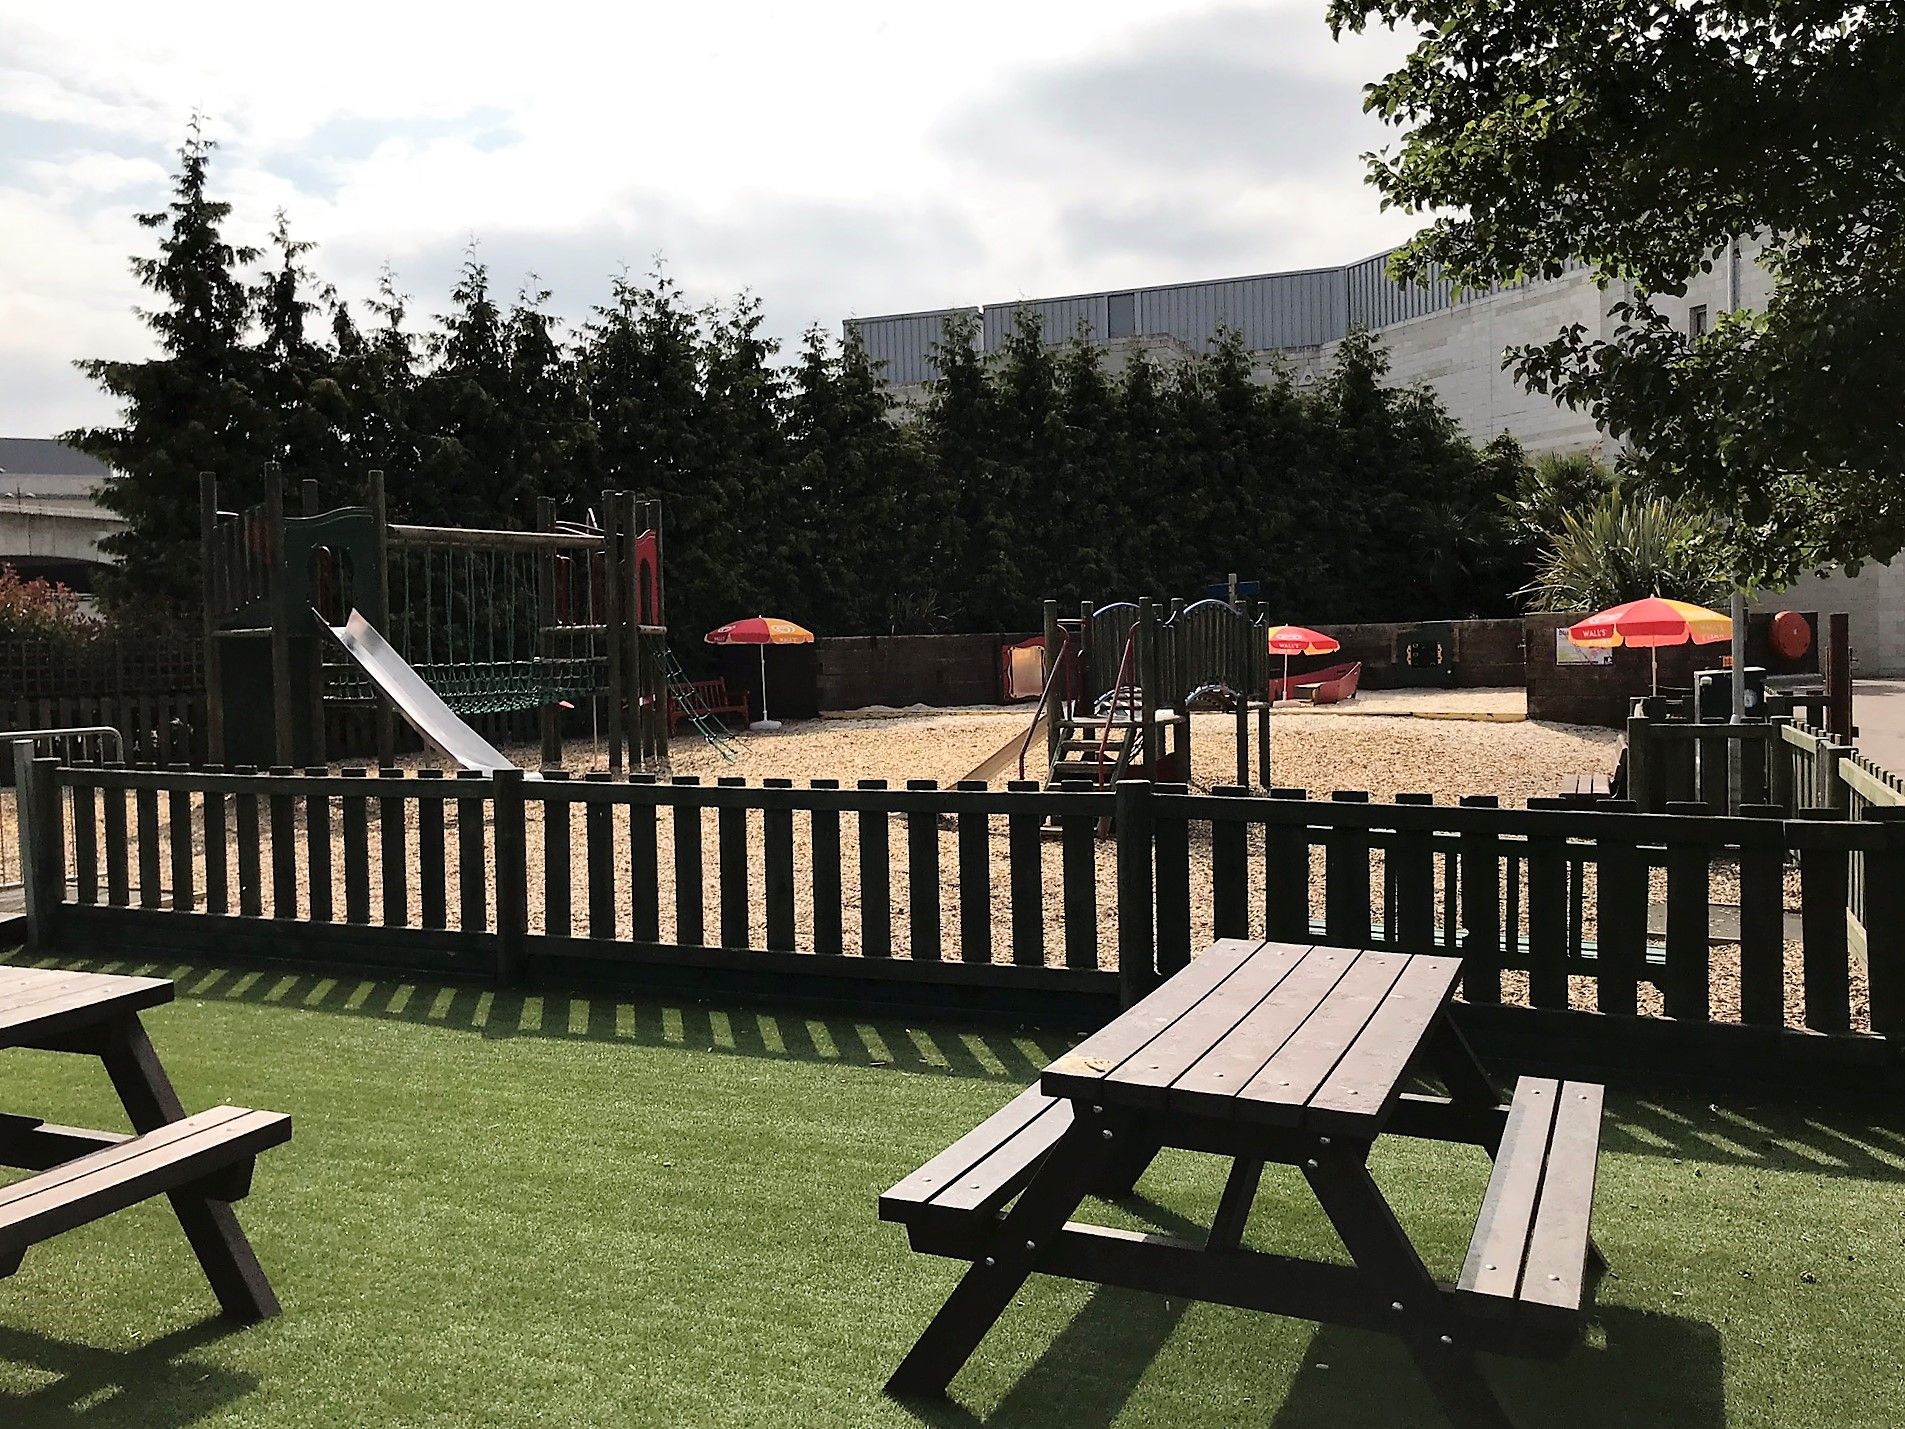 The children's play area outside The Village at Bluewater Shopping Centre